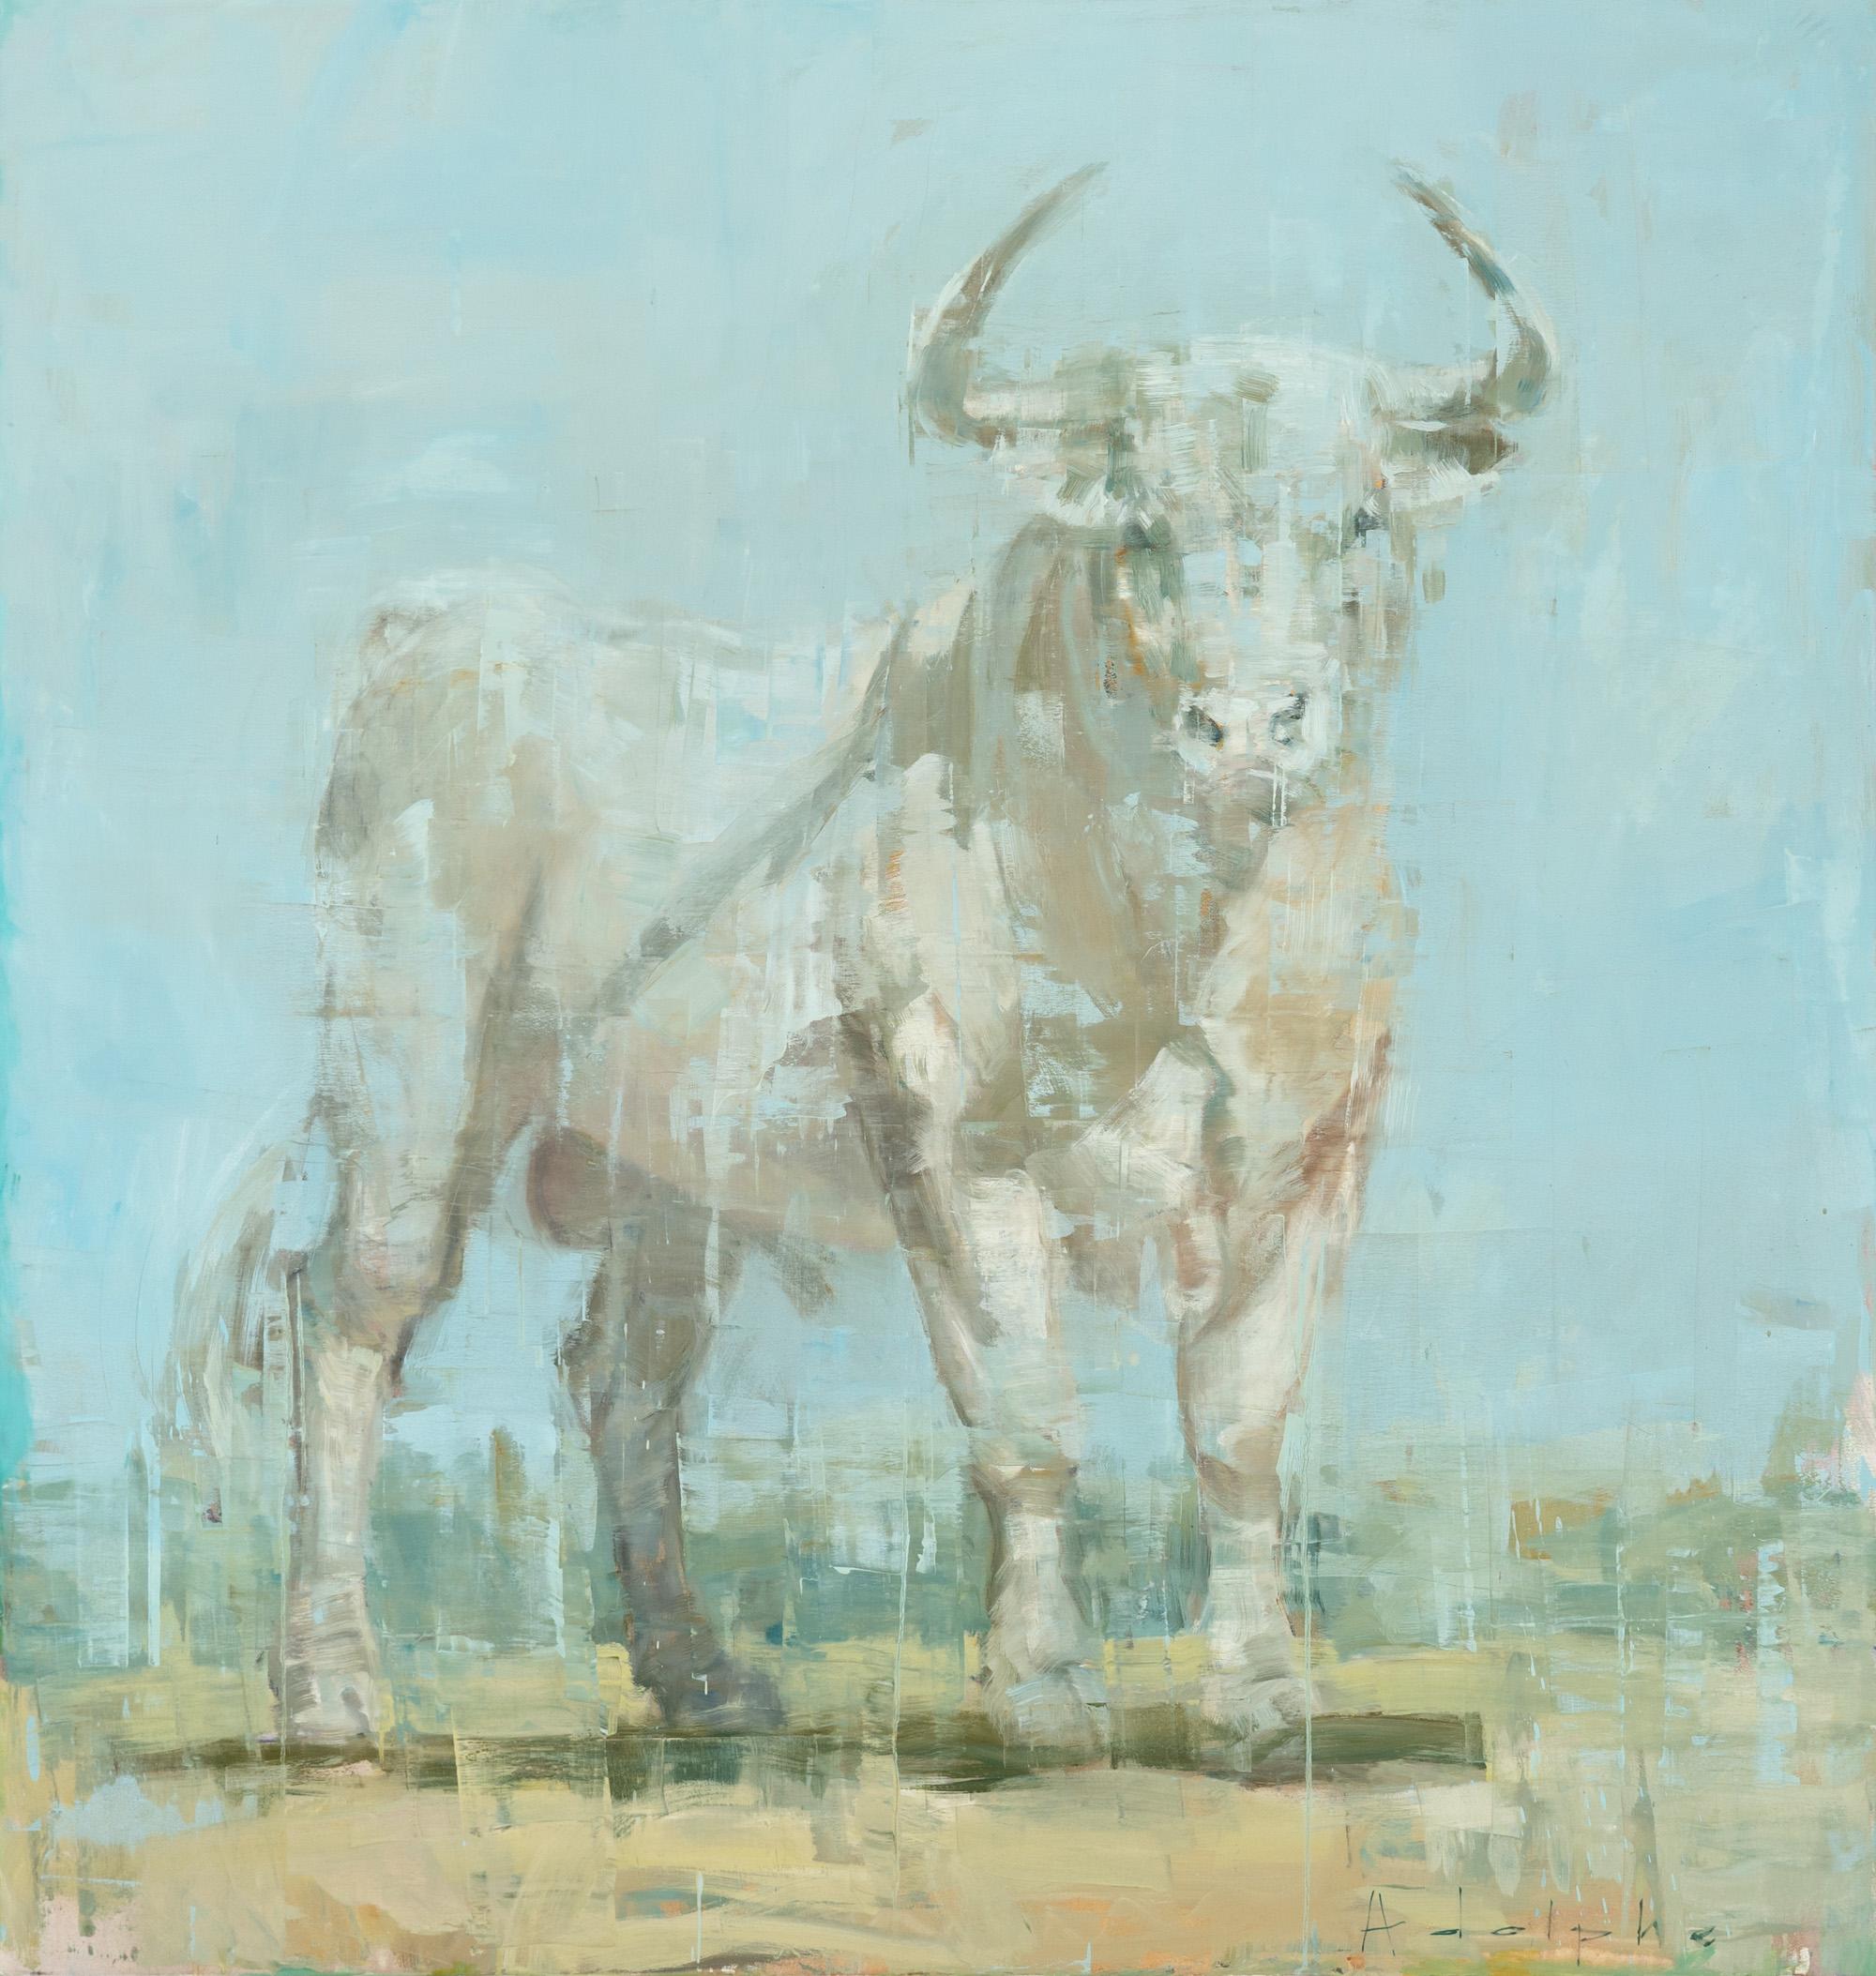 "Toro Blanco No. 2" Abstract Bull Portrait Oil on Canvas Painting